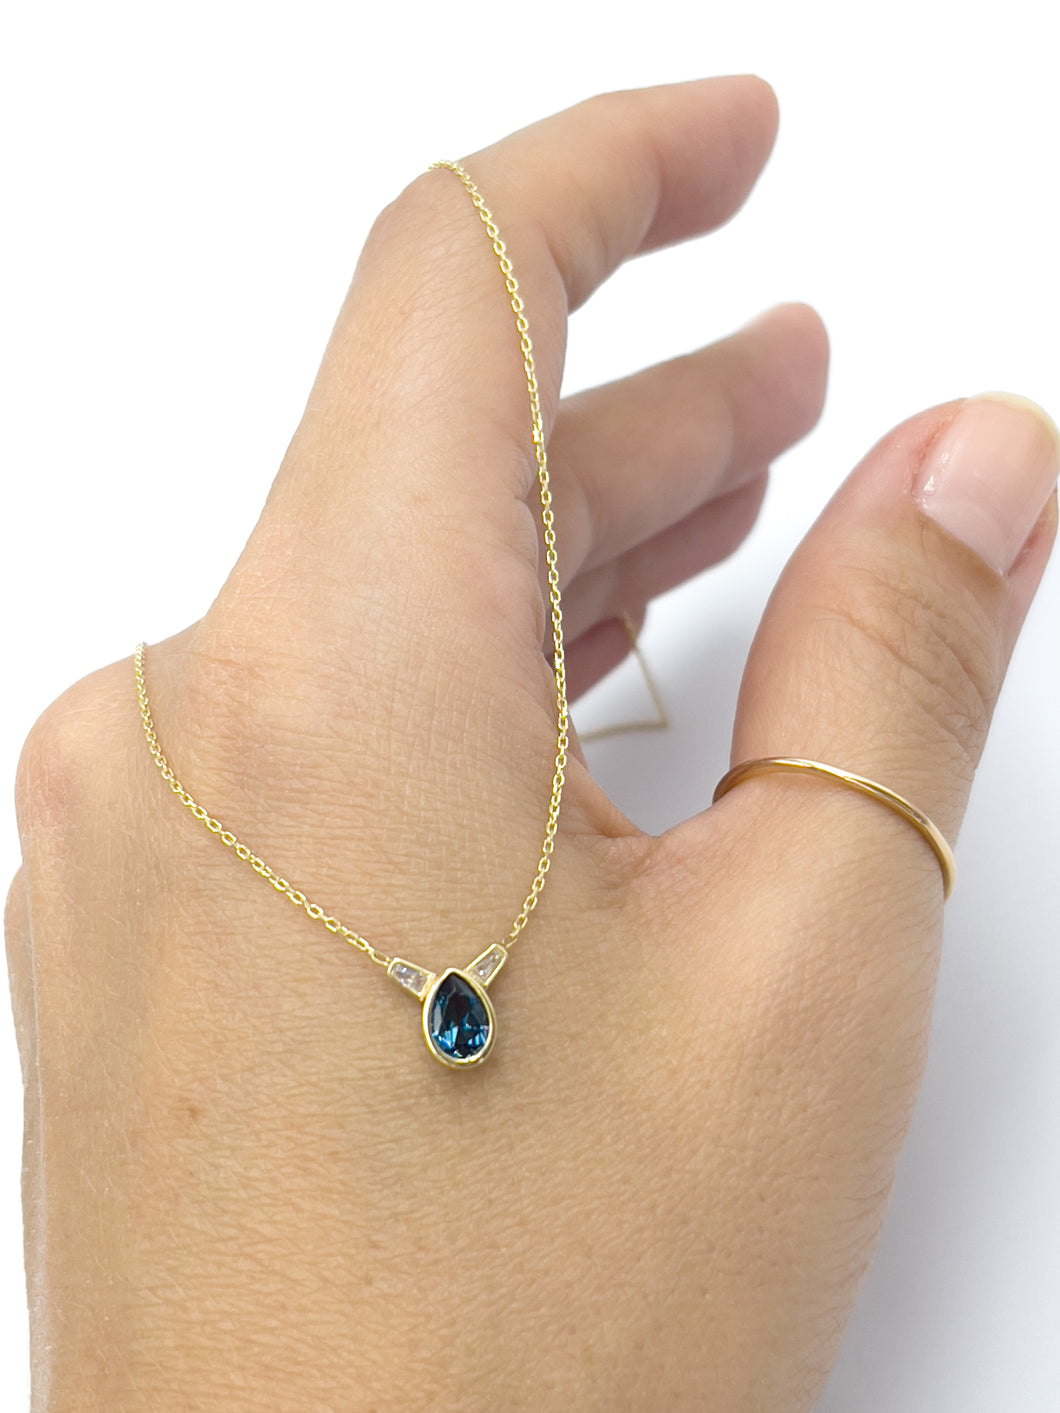 Solid Gold Blue Sapphire Or Ruby Necklace